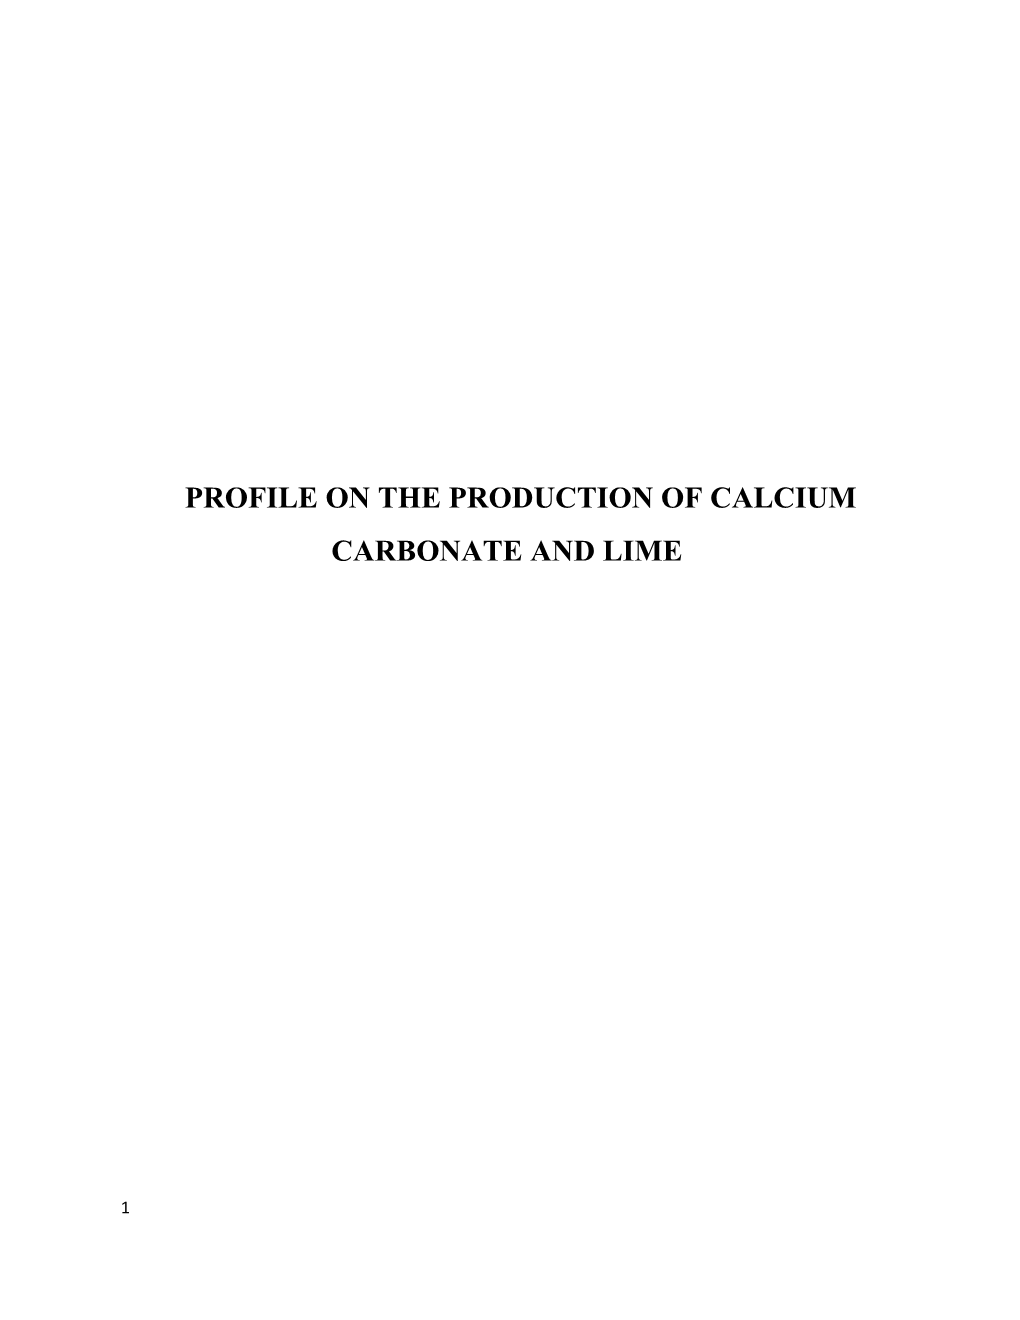 Profile on the Production of Calcium Carbonate and Lime